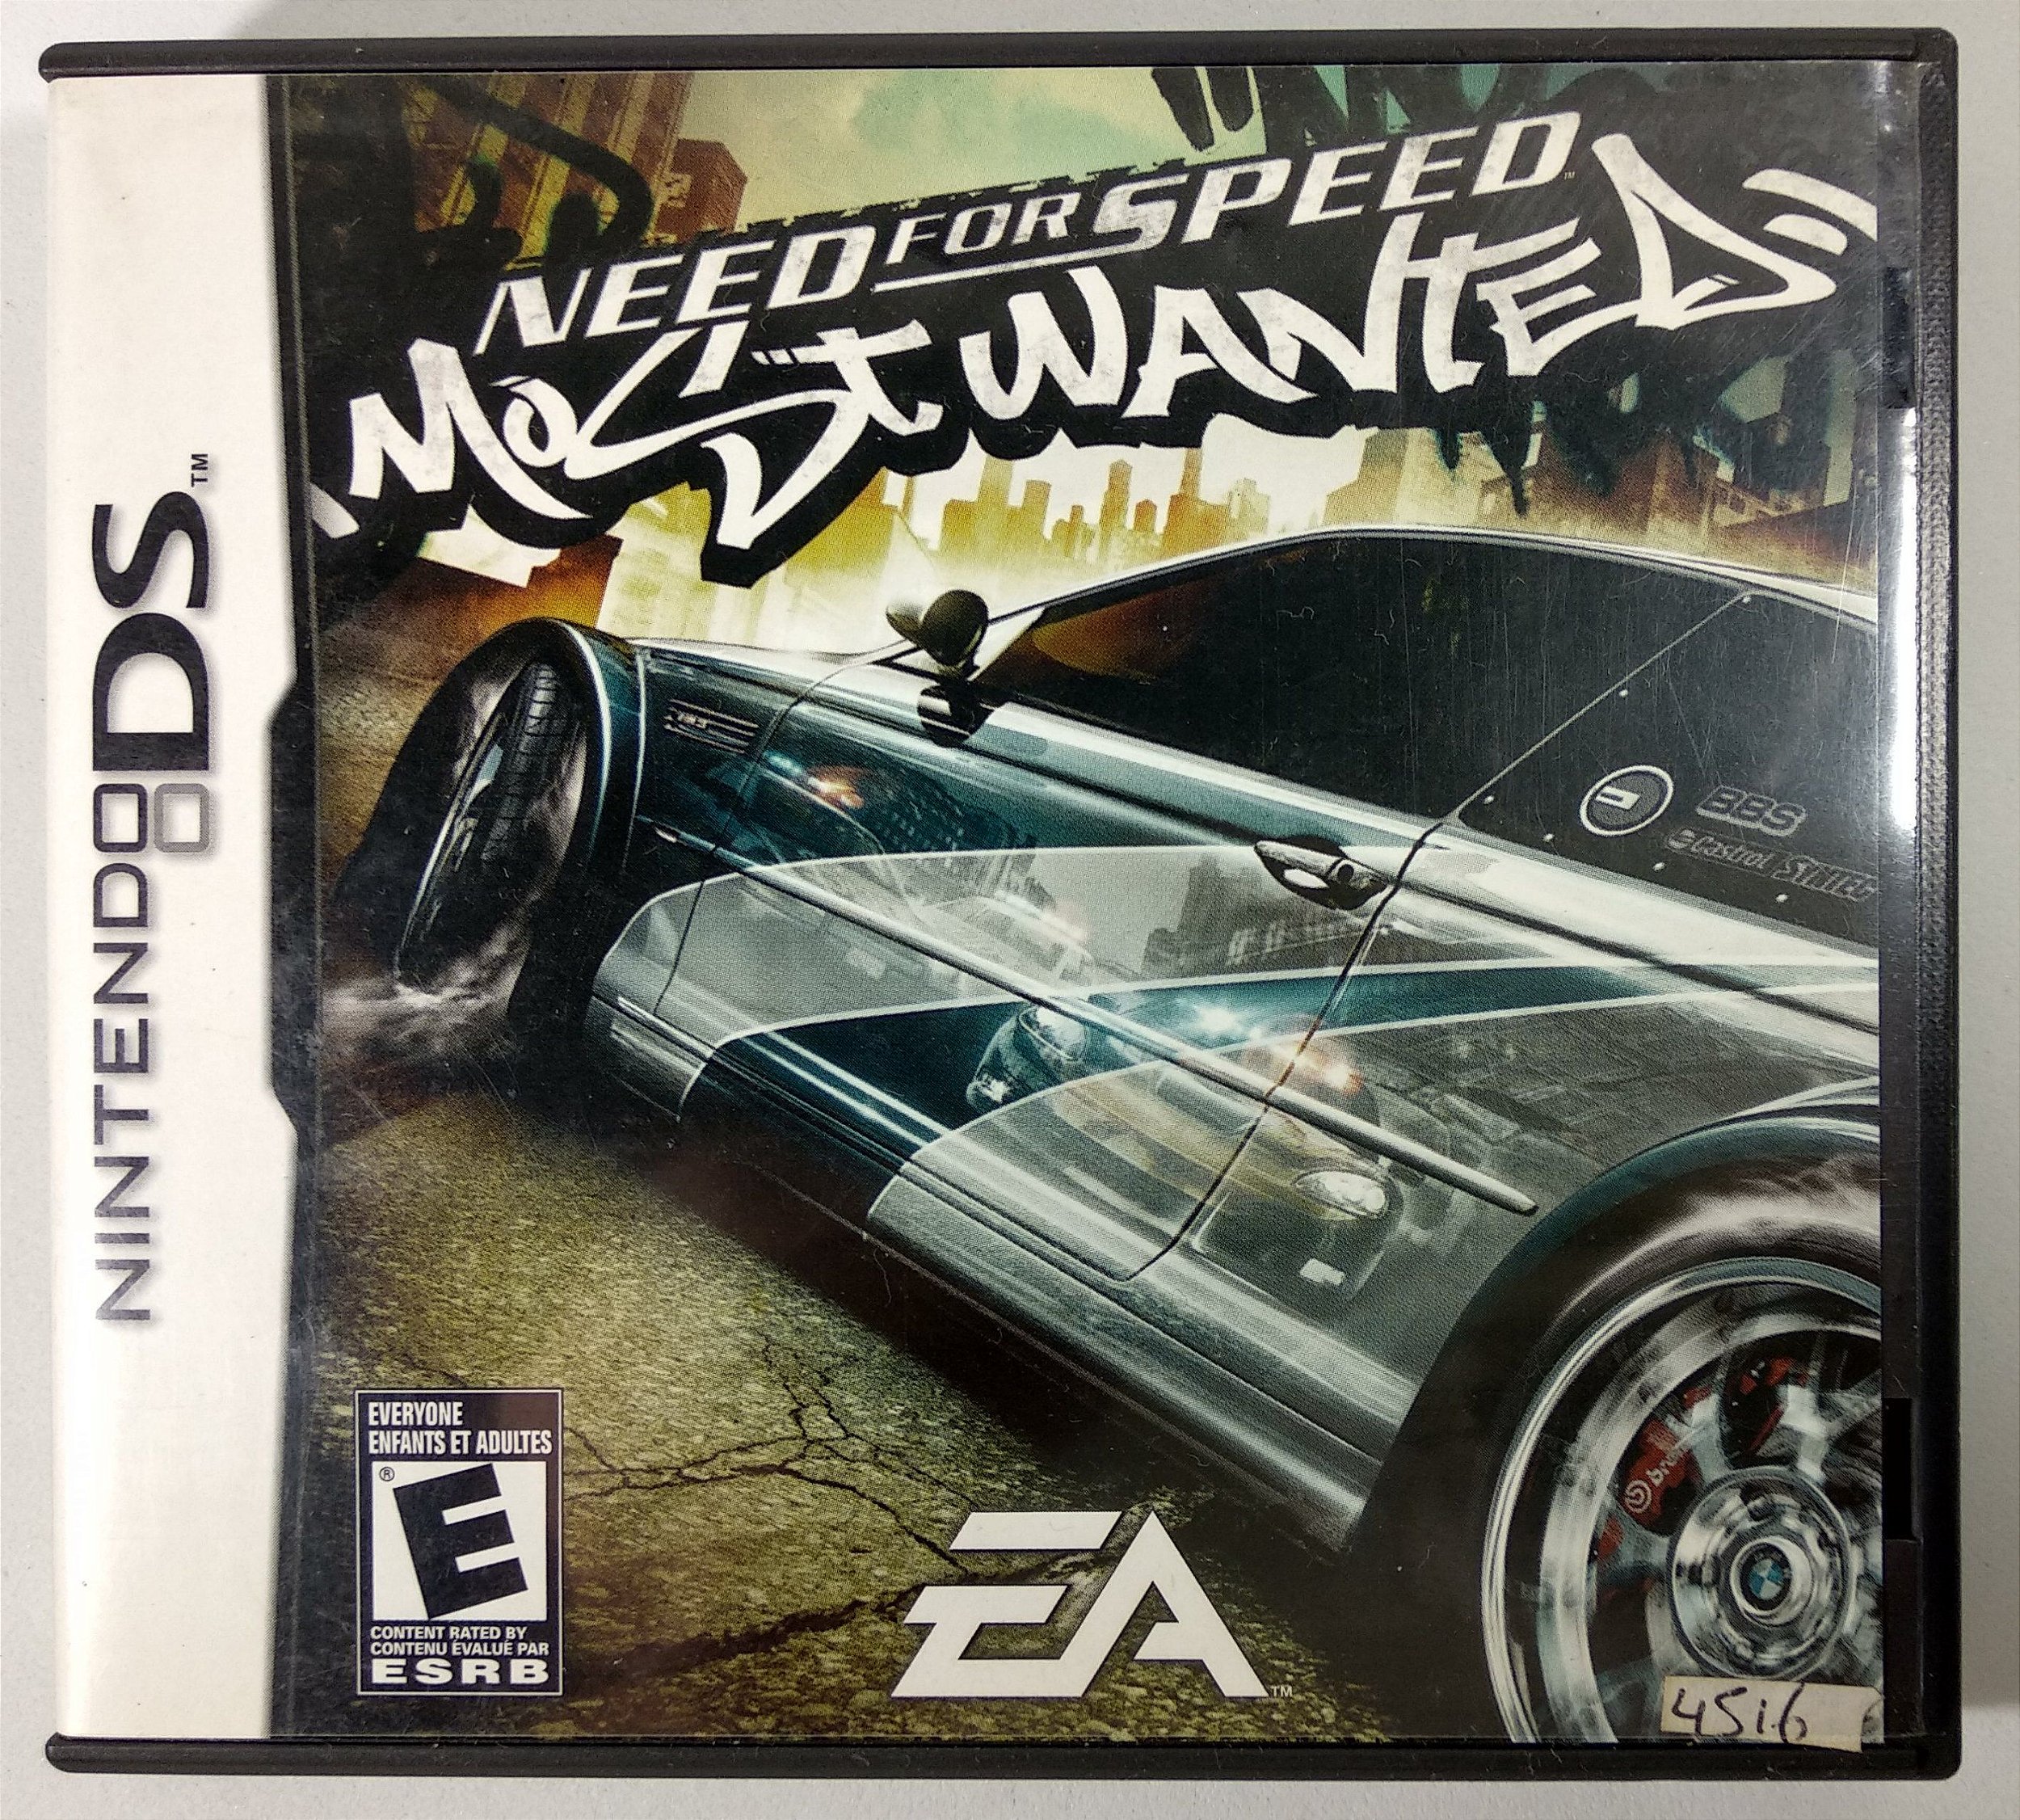 Need For Speed Carbon Original - DS - Sebo dos Games - 10 anos!